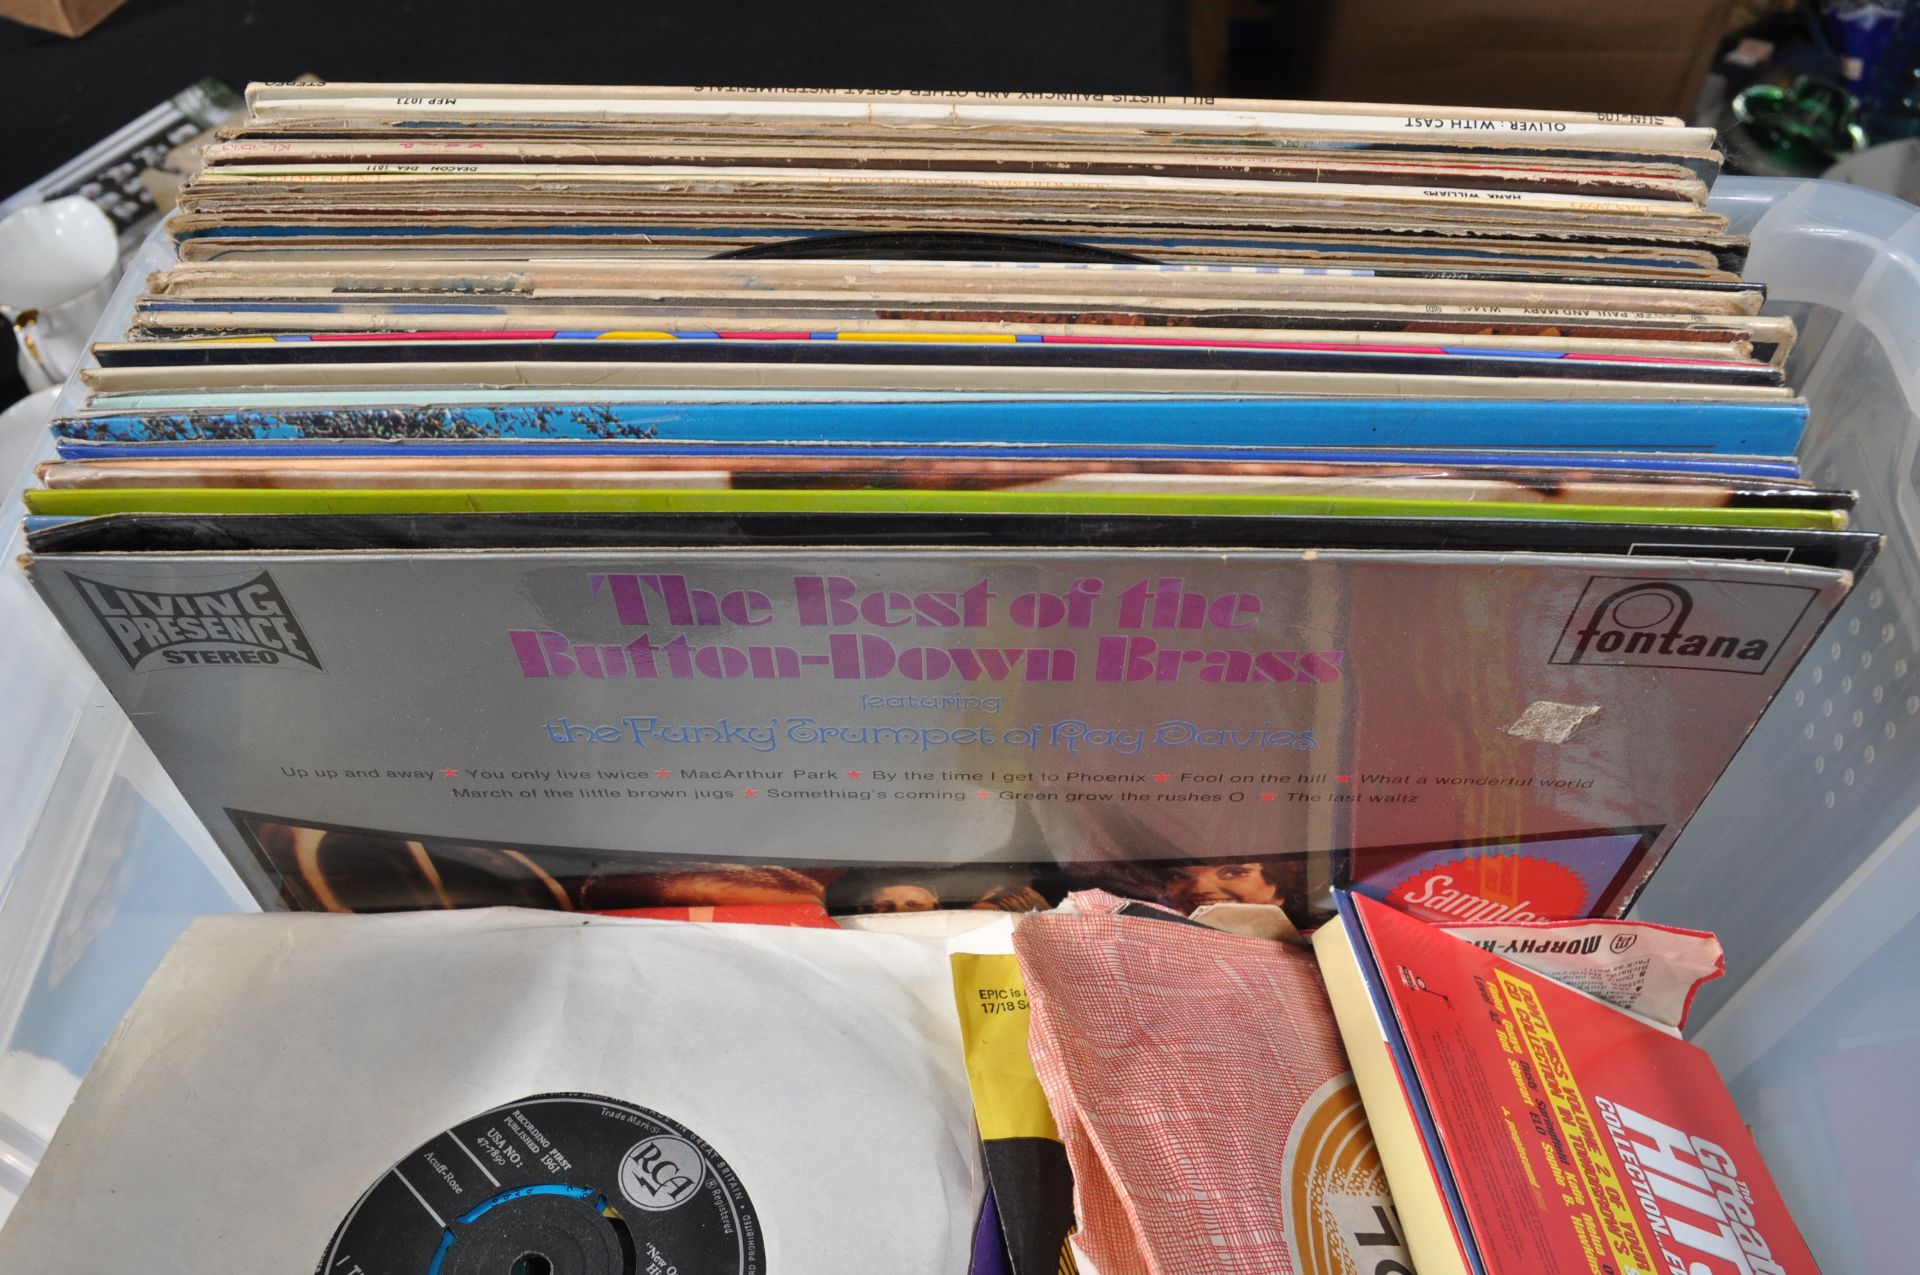 LARGE COLLECTION OF LP’S VINYL 45RPM RECORDS - Image 3 of 6